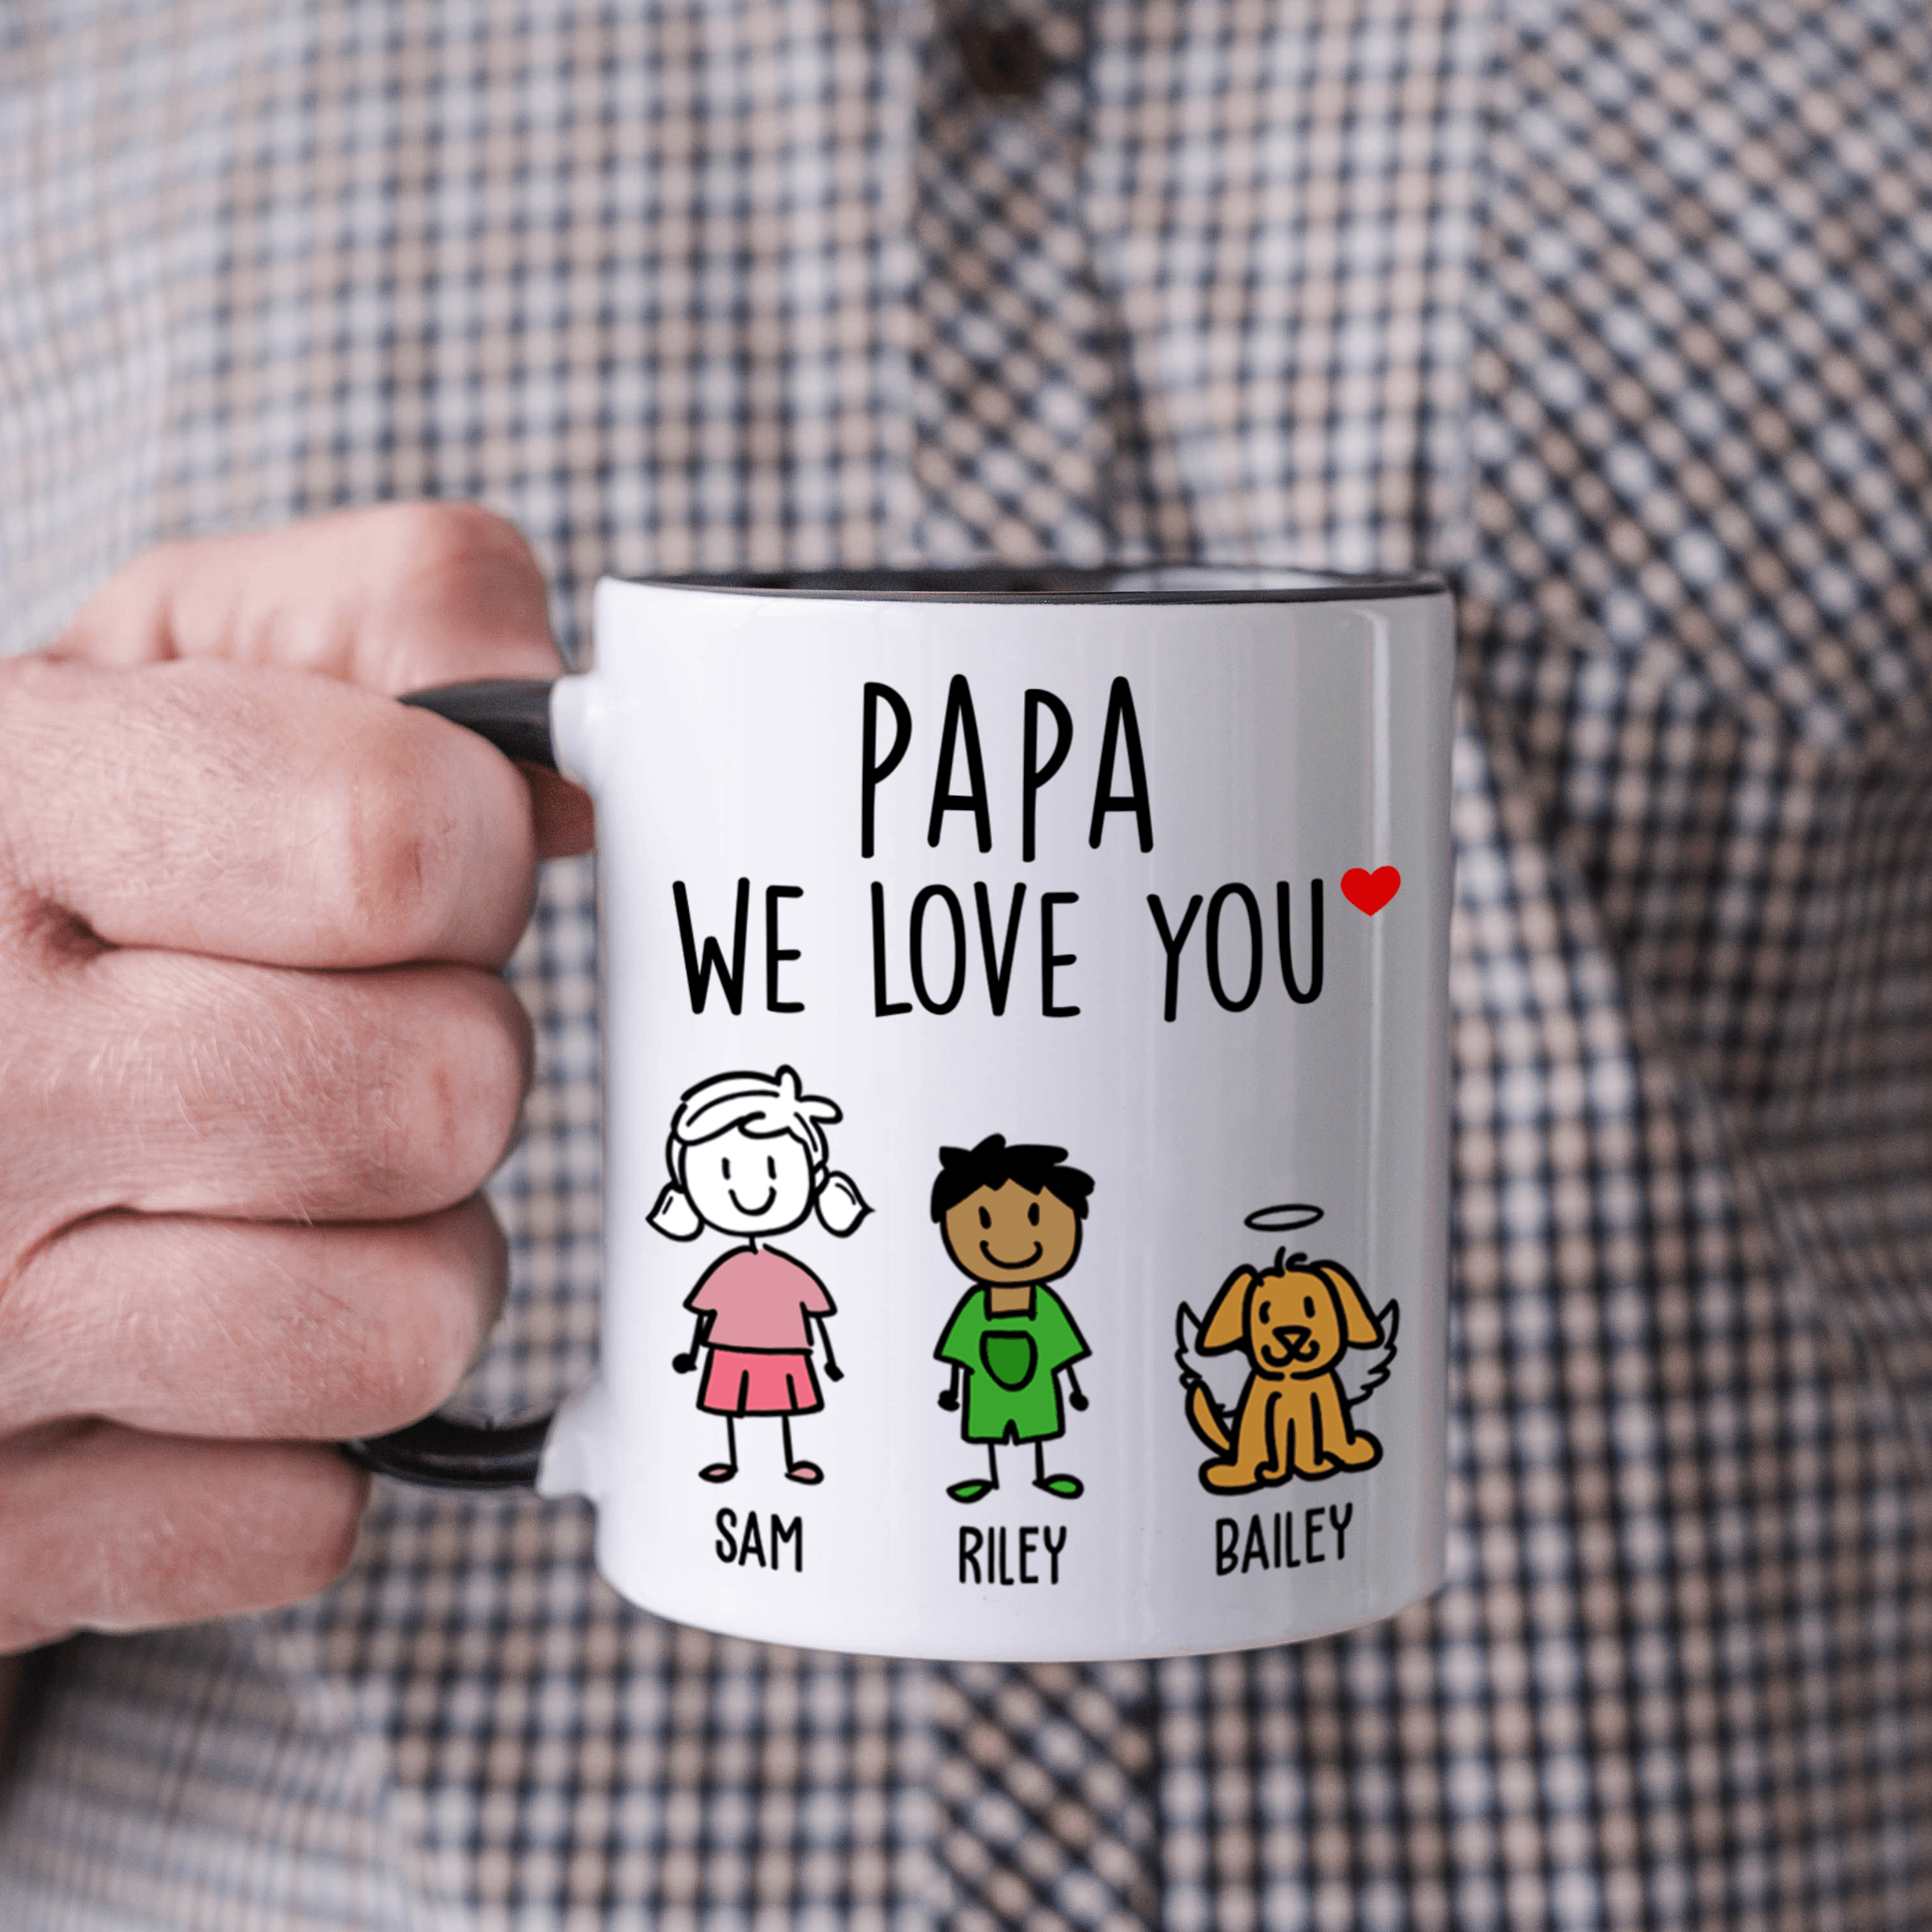 Dad, We Love You - Personalized Custom Coffee Mug - Funny Father's Day Gift, Birthday Gift For Best Dad Ever, Grandpa, Daddy, Dada From Daughter, Son, Kids, Wife